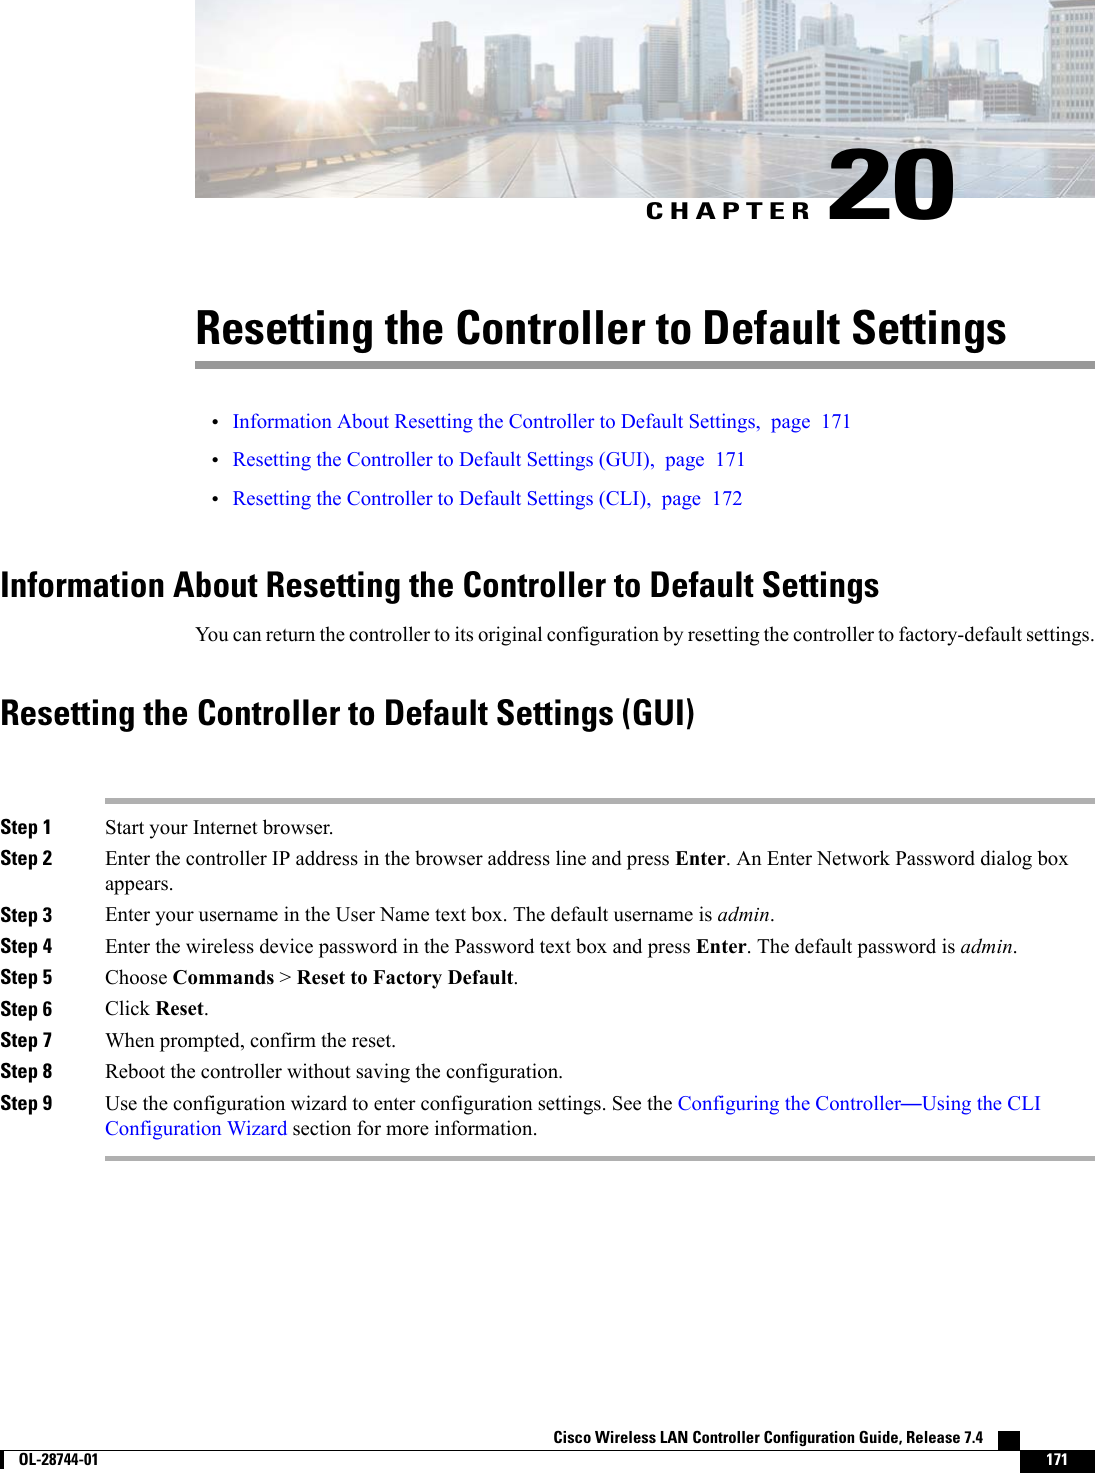 CHAPTER 20Resetting the Controller to Default Settings•Information About Resetting the Controller to Default Settings, page 171•Resetting the Controller to Default Settings (GUI), page 171•Resetting the Controller to Default Settings (CLI), page 172Information About Resetting the Controller to Default SettingsYou can return the controller to its original configuration by resetting the controller to factory-default settings.Resetting the Controller to Default Settings (GUI)Step 1 Start your Internet browser.Step 2 Enter the controller IP address in the browser address line and press Enter. An Enter Network Password dialog boxappears.Step 3 Enter your username in the User Name text box. The default username is admin.Step 4 Enter the wireless device password in the Password text box and press Enter. The default password is admin.Step 5 Choose Commands &gt;Reset to Factory Default.Step 6 Click Reset.Step 7 When prompted, confirm the reset.Step 8 Reboot the controller without saving the configuration.Step 9 Use the configuration wizard to enter configuration settings. See the Configuring the Controller—Using the CLIConfiguration Wizard section for more information.Cisco Wireless LAN Controller Configuration Guide, Release 7.4        OL-28744-01 171